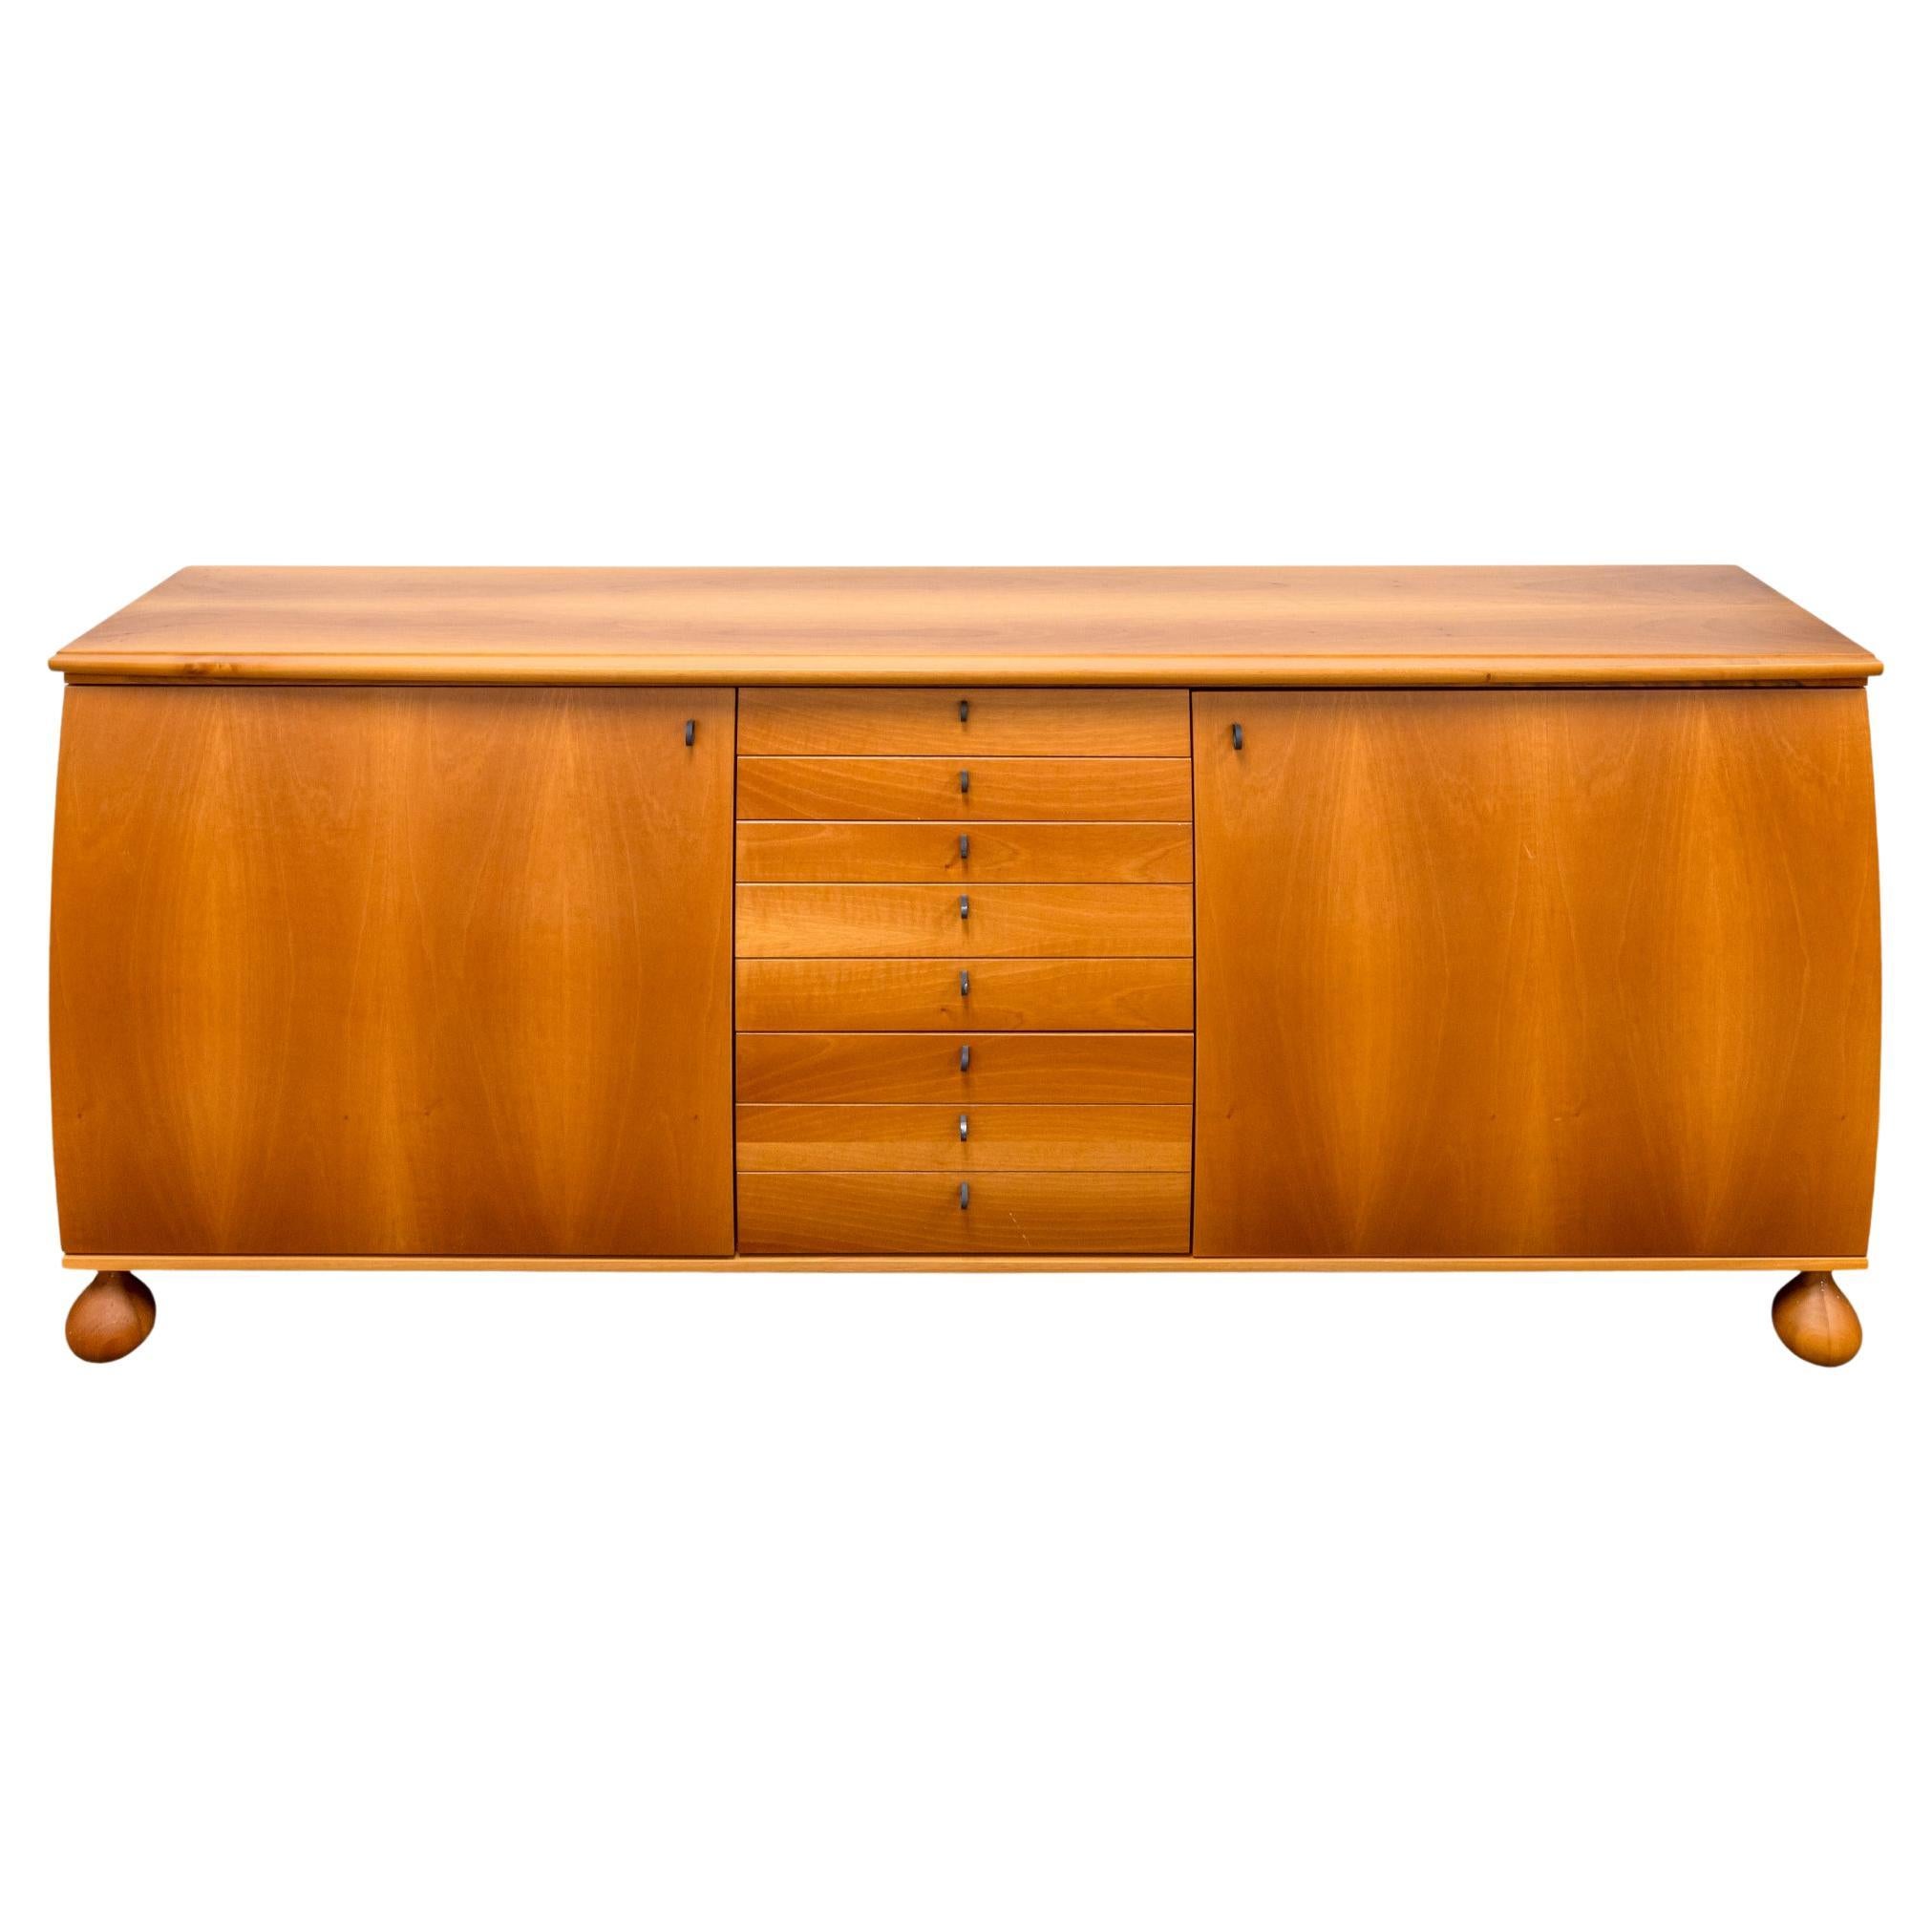 Modern Umberto Asnago for Giorgetti 1980s Italian Curved Wood Credenza Dresser For Sale